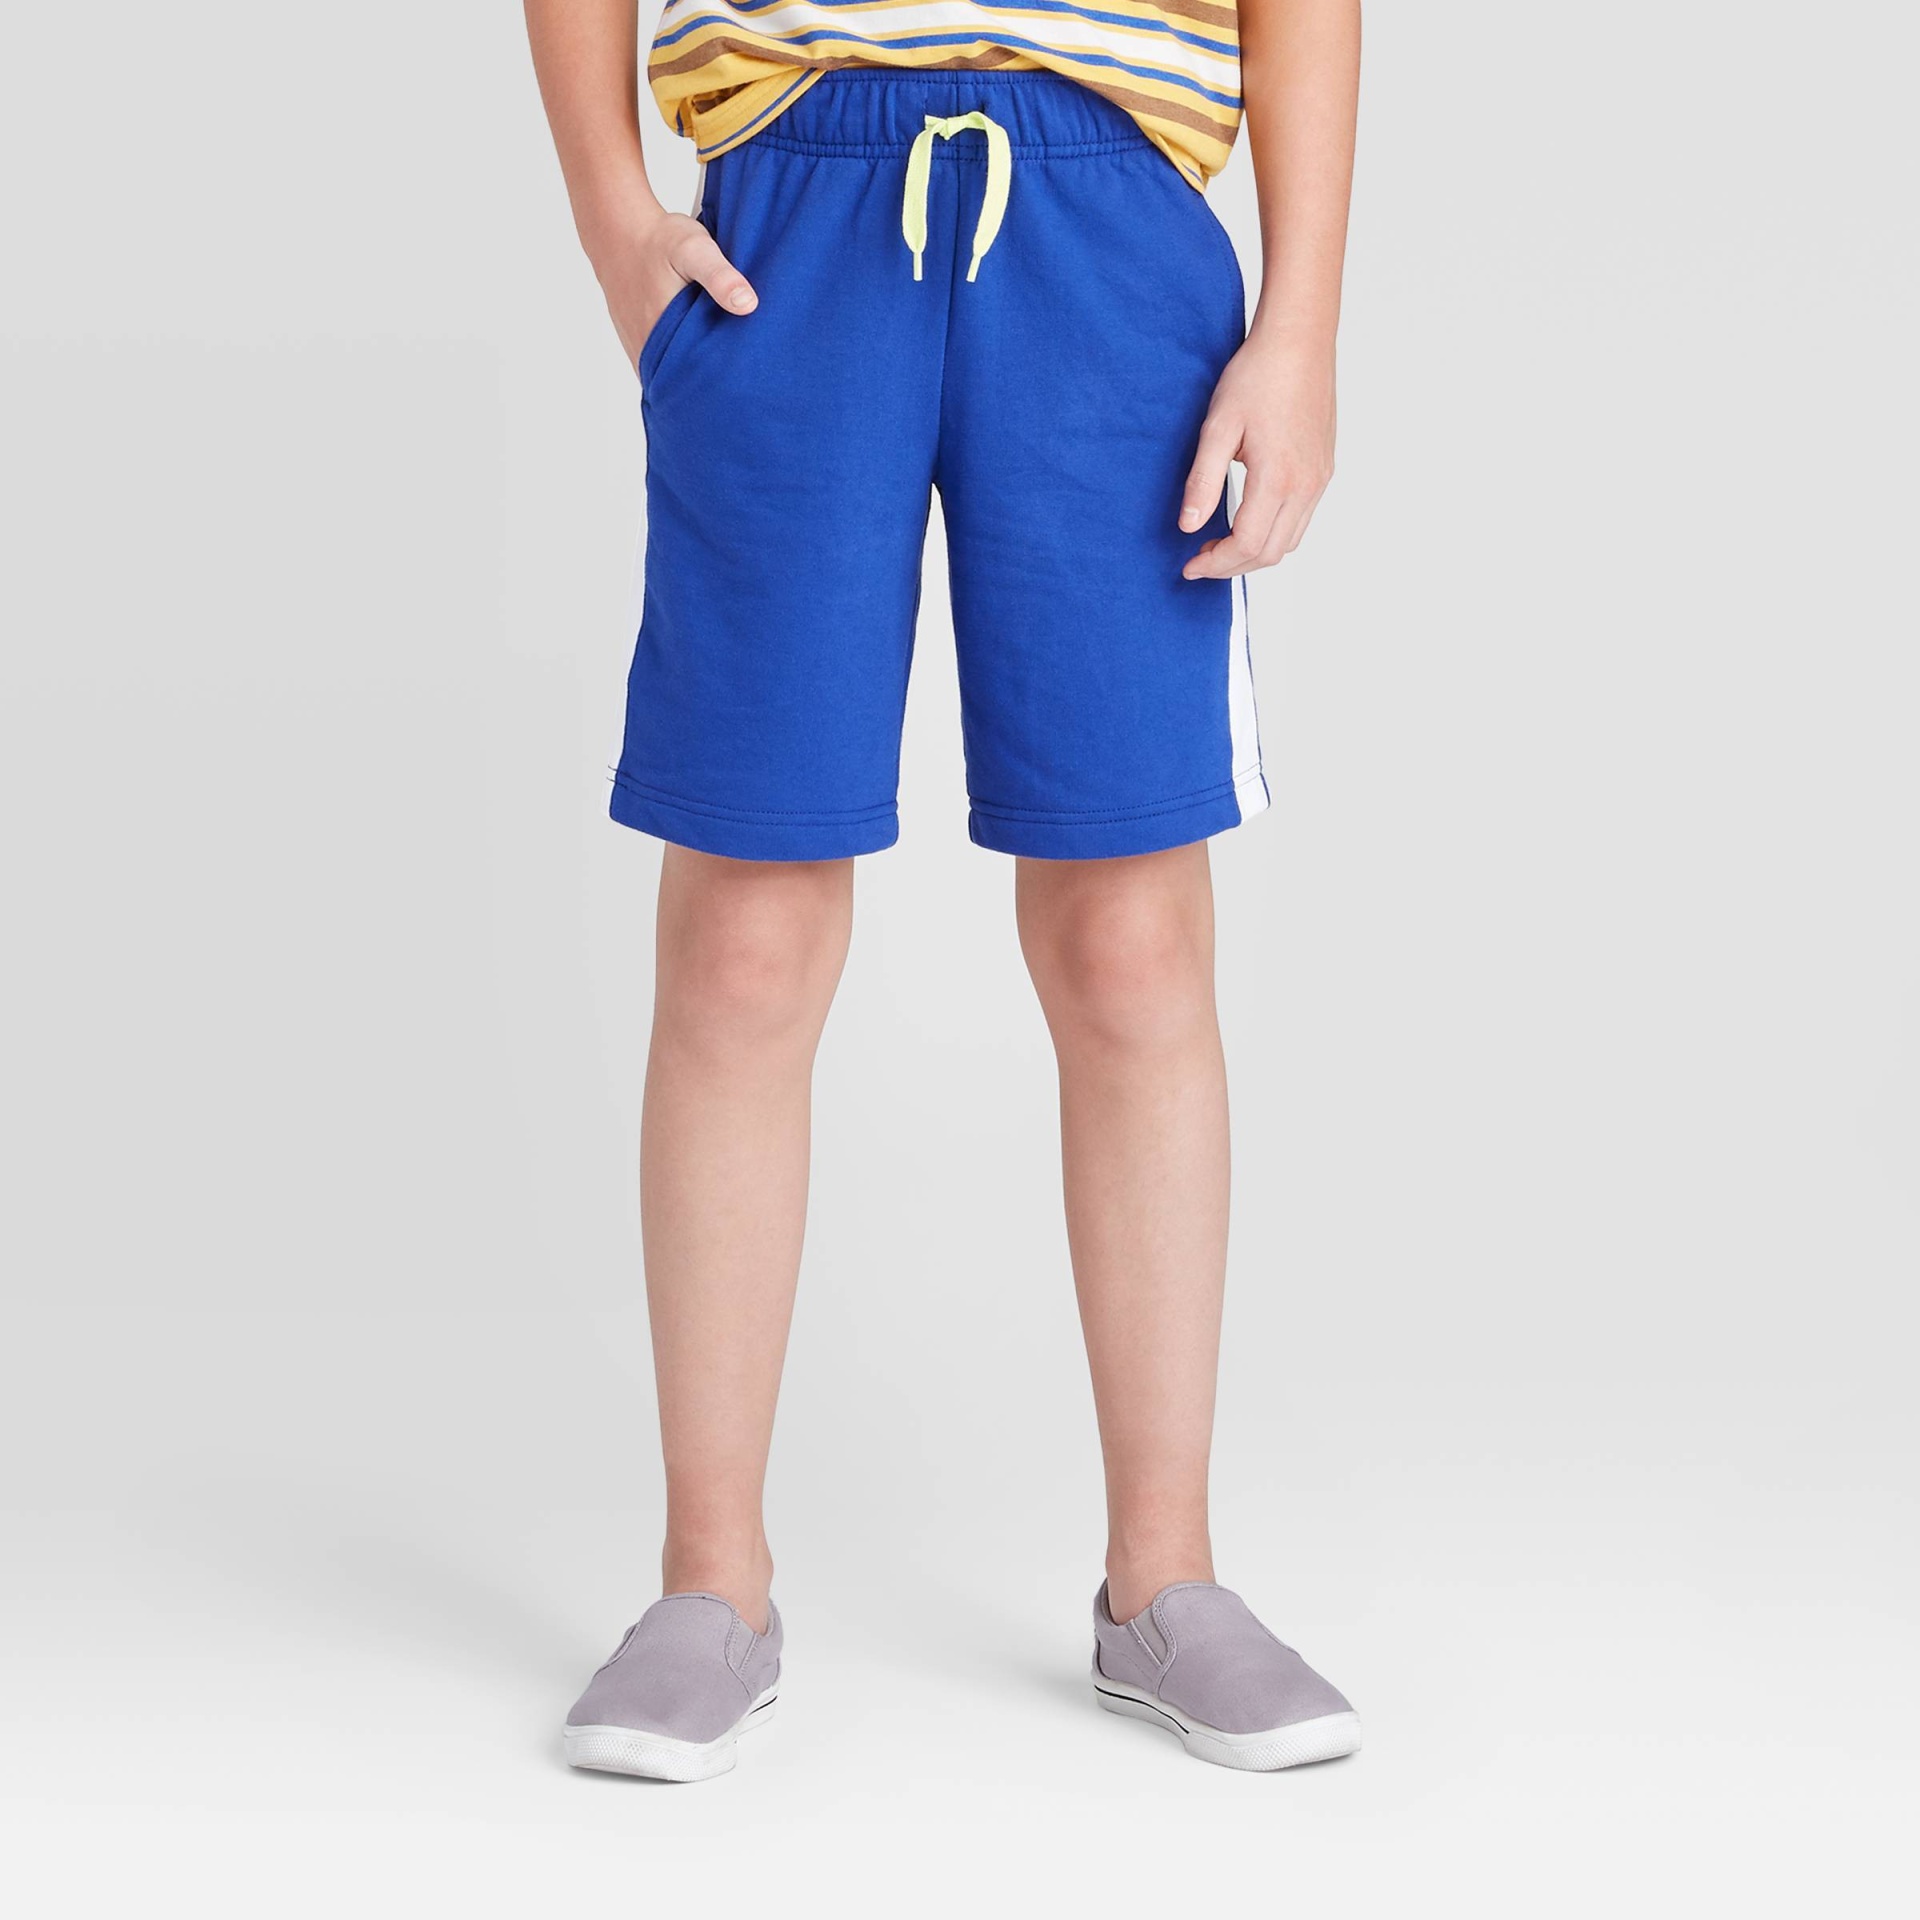 Claire & Charlie Boys Pull On Shorts - Royal Blue Knit